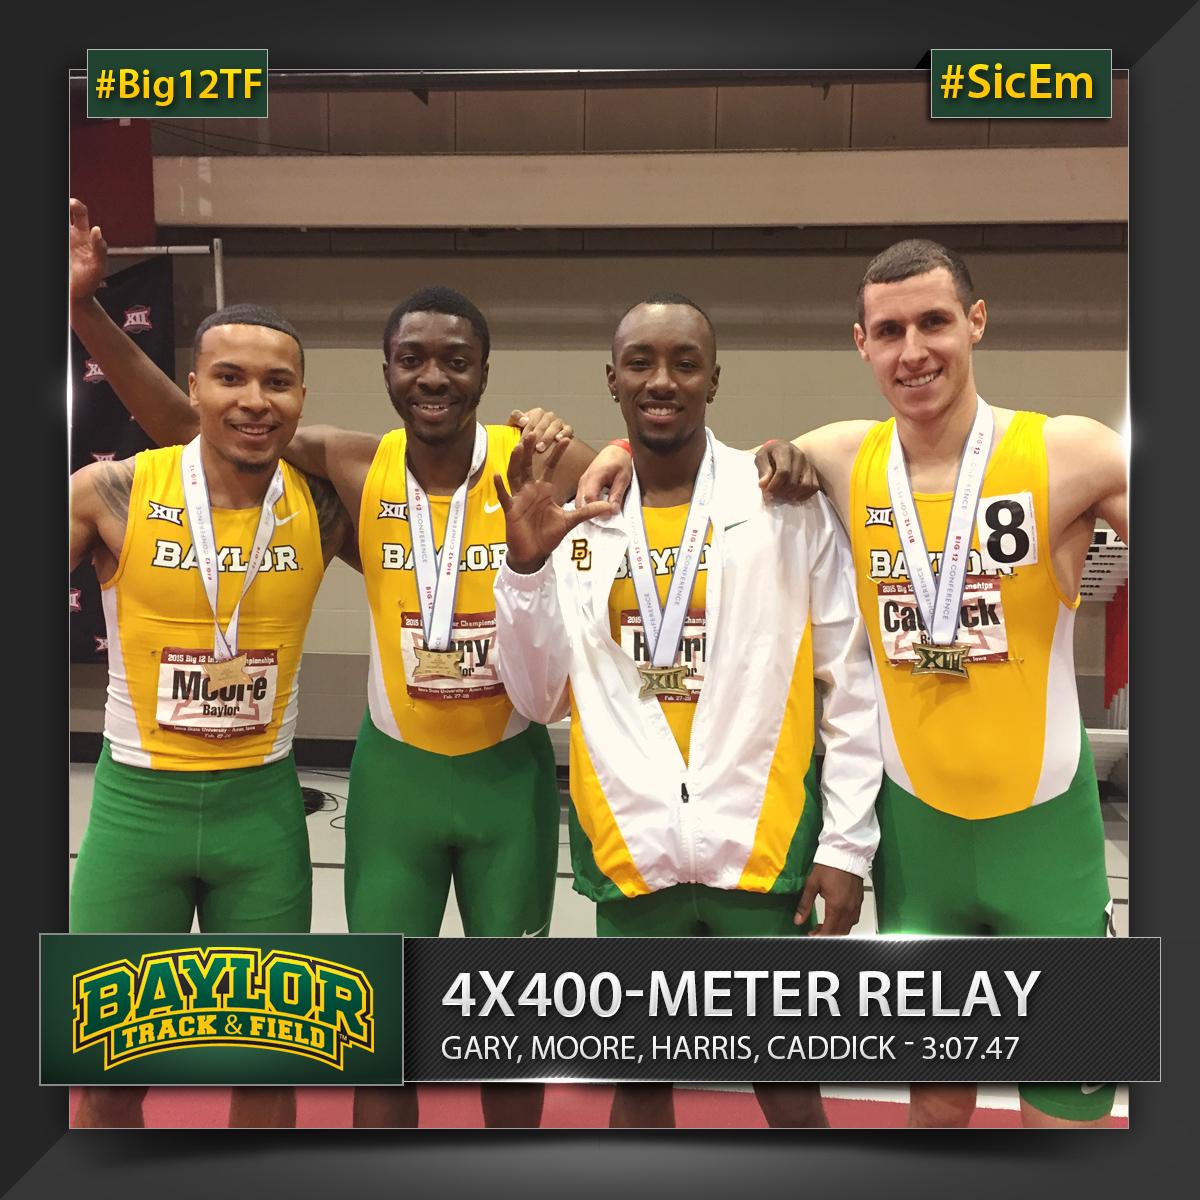 “@BaylorTrack: Baylor has won the #Big12TF indoor 4x4 race 14 times in the last 19 years. #QuartermilerU ” Go Kevin!